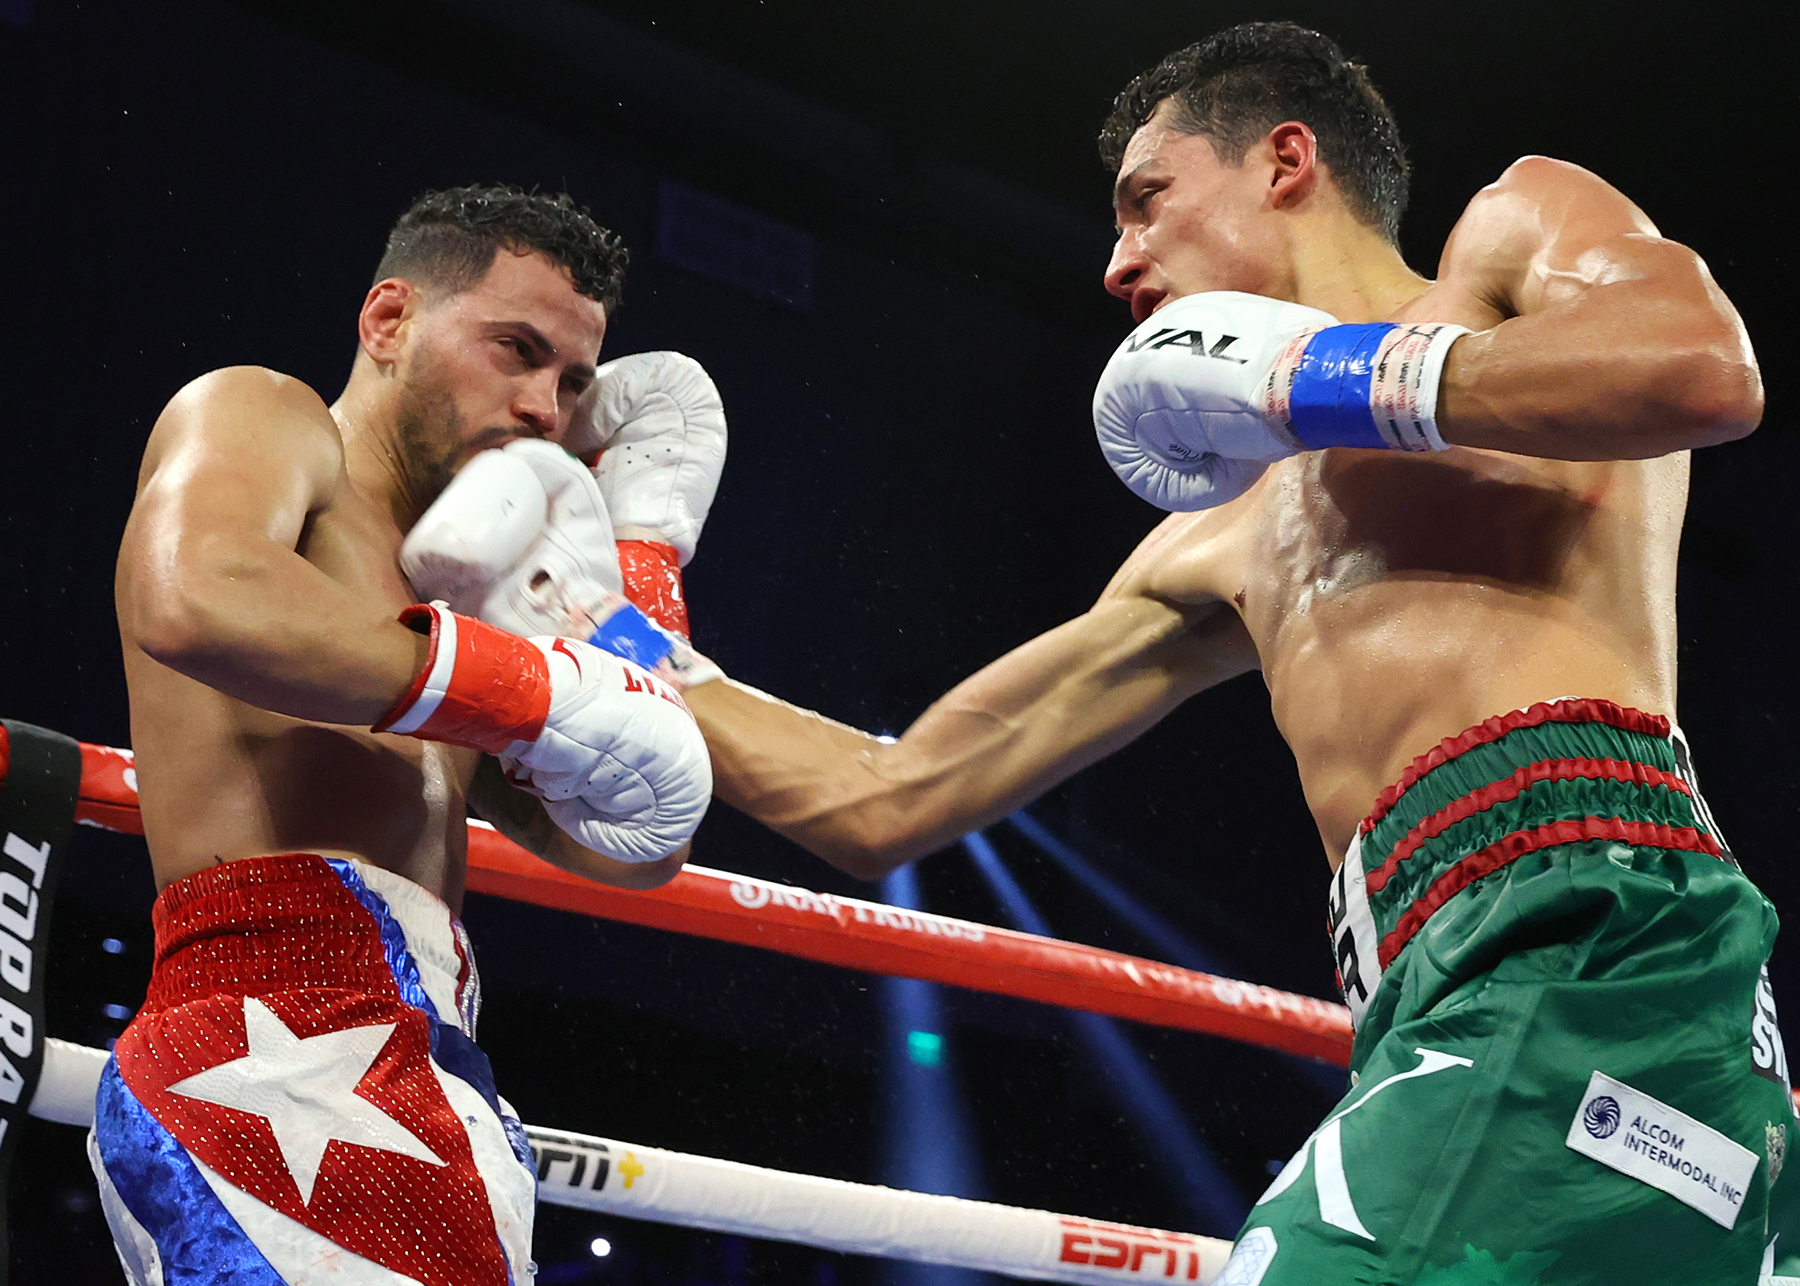 Clutch knockdown in dying moments of 12th sees Espinoza prevail in rock-em, sock-em Top Rank classic